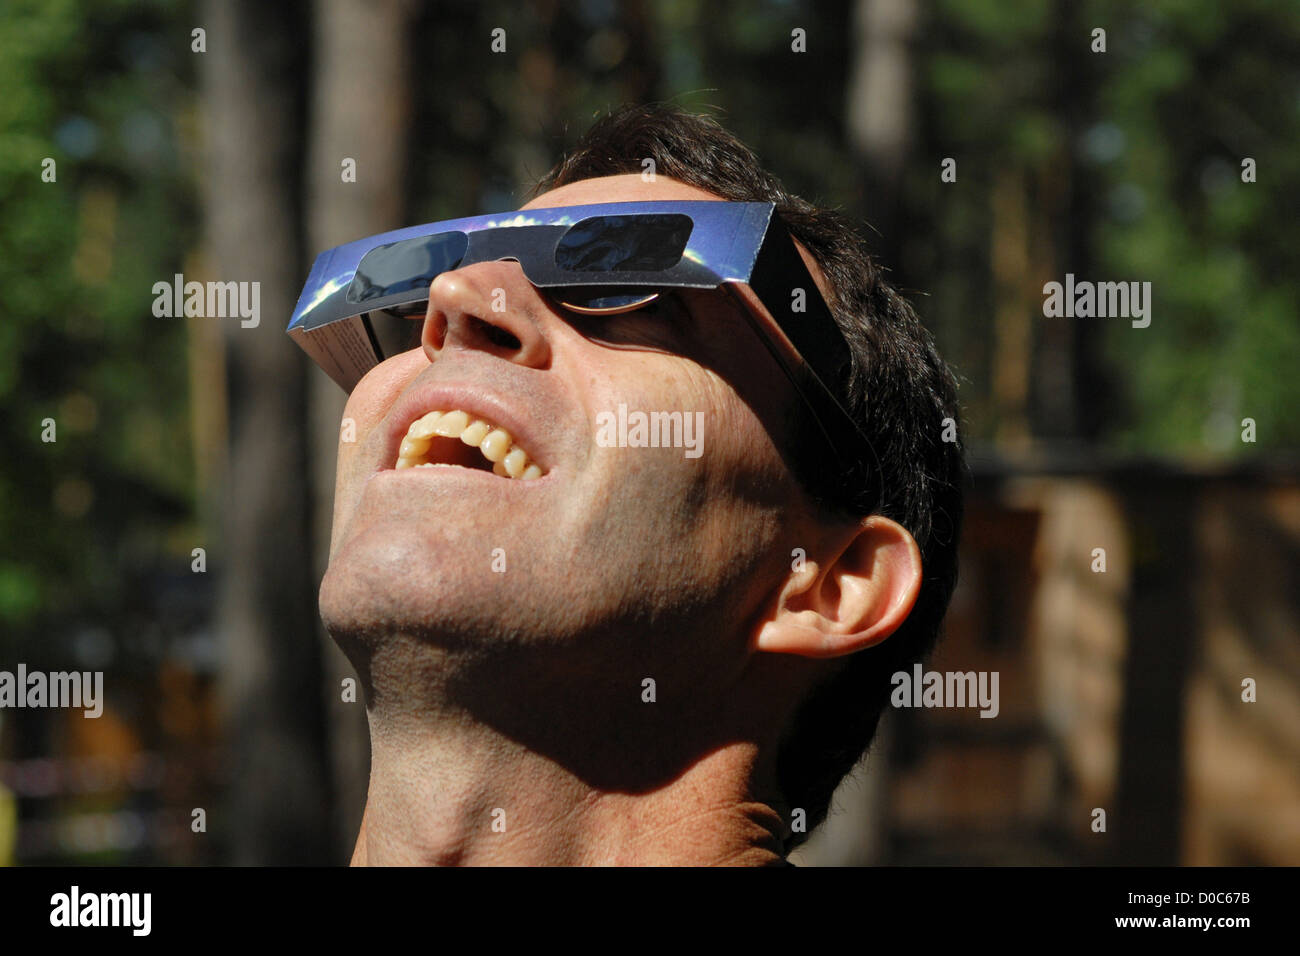 A spectator wearing protective glasses views total eclipse sun over Ob River near Novosibirsk Siberia Russia on August 1 2008. Stock Photo